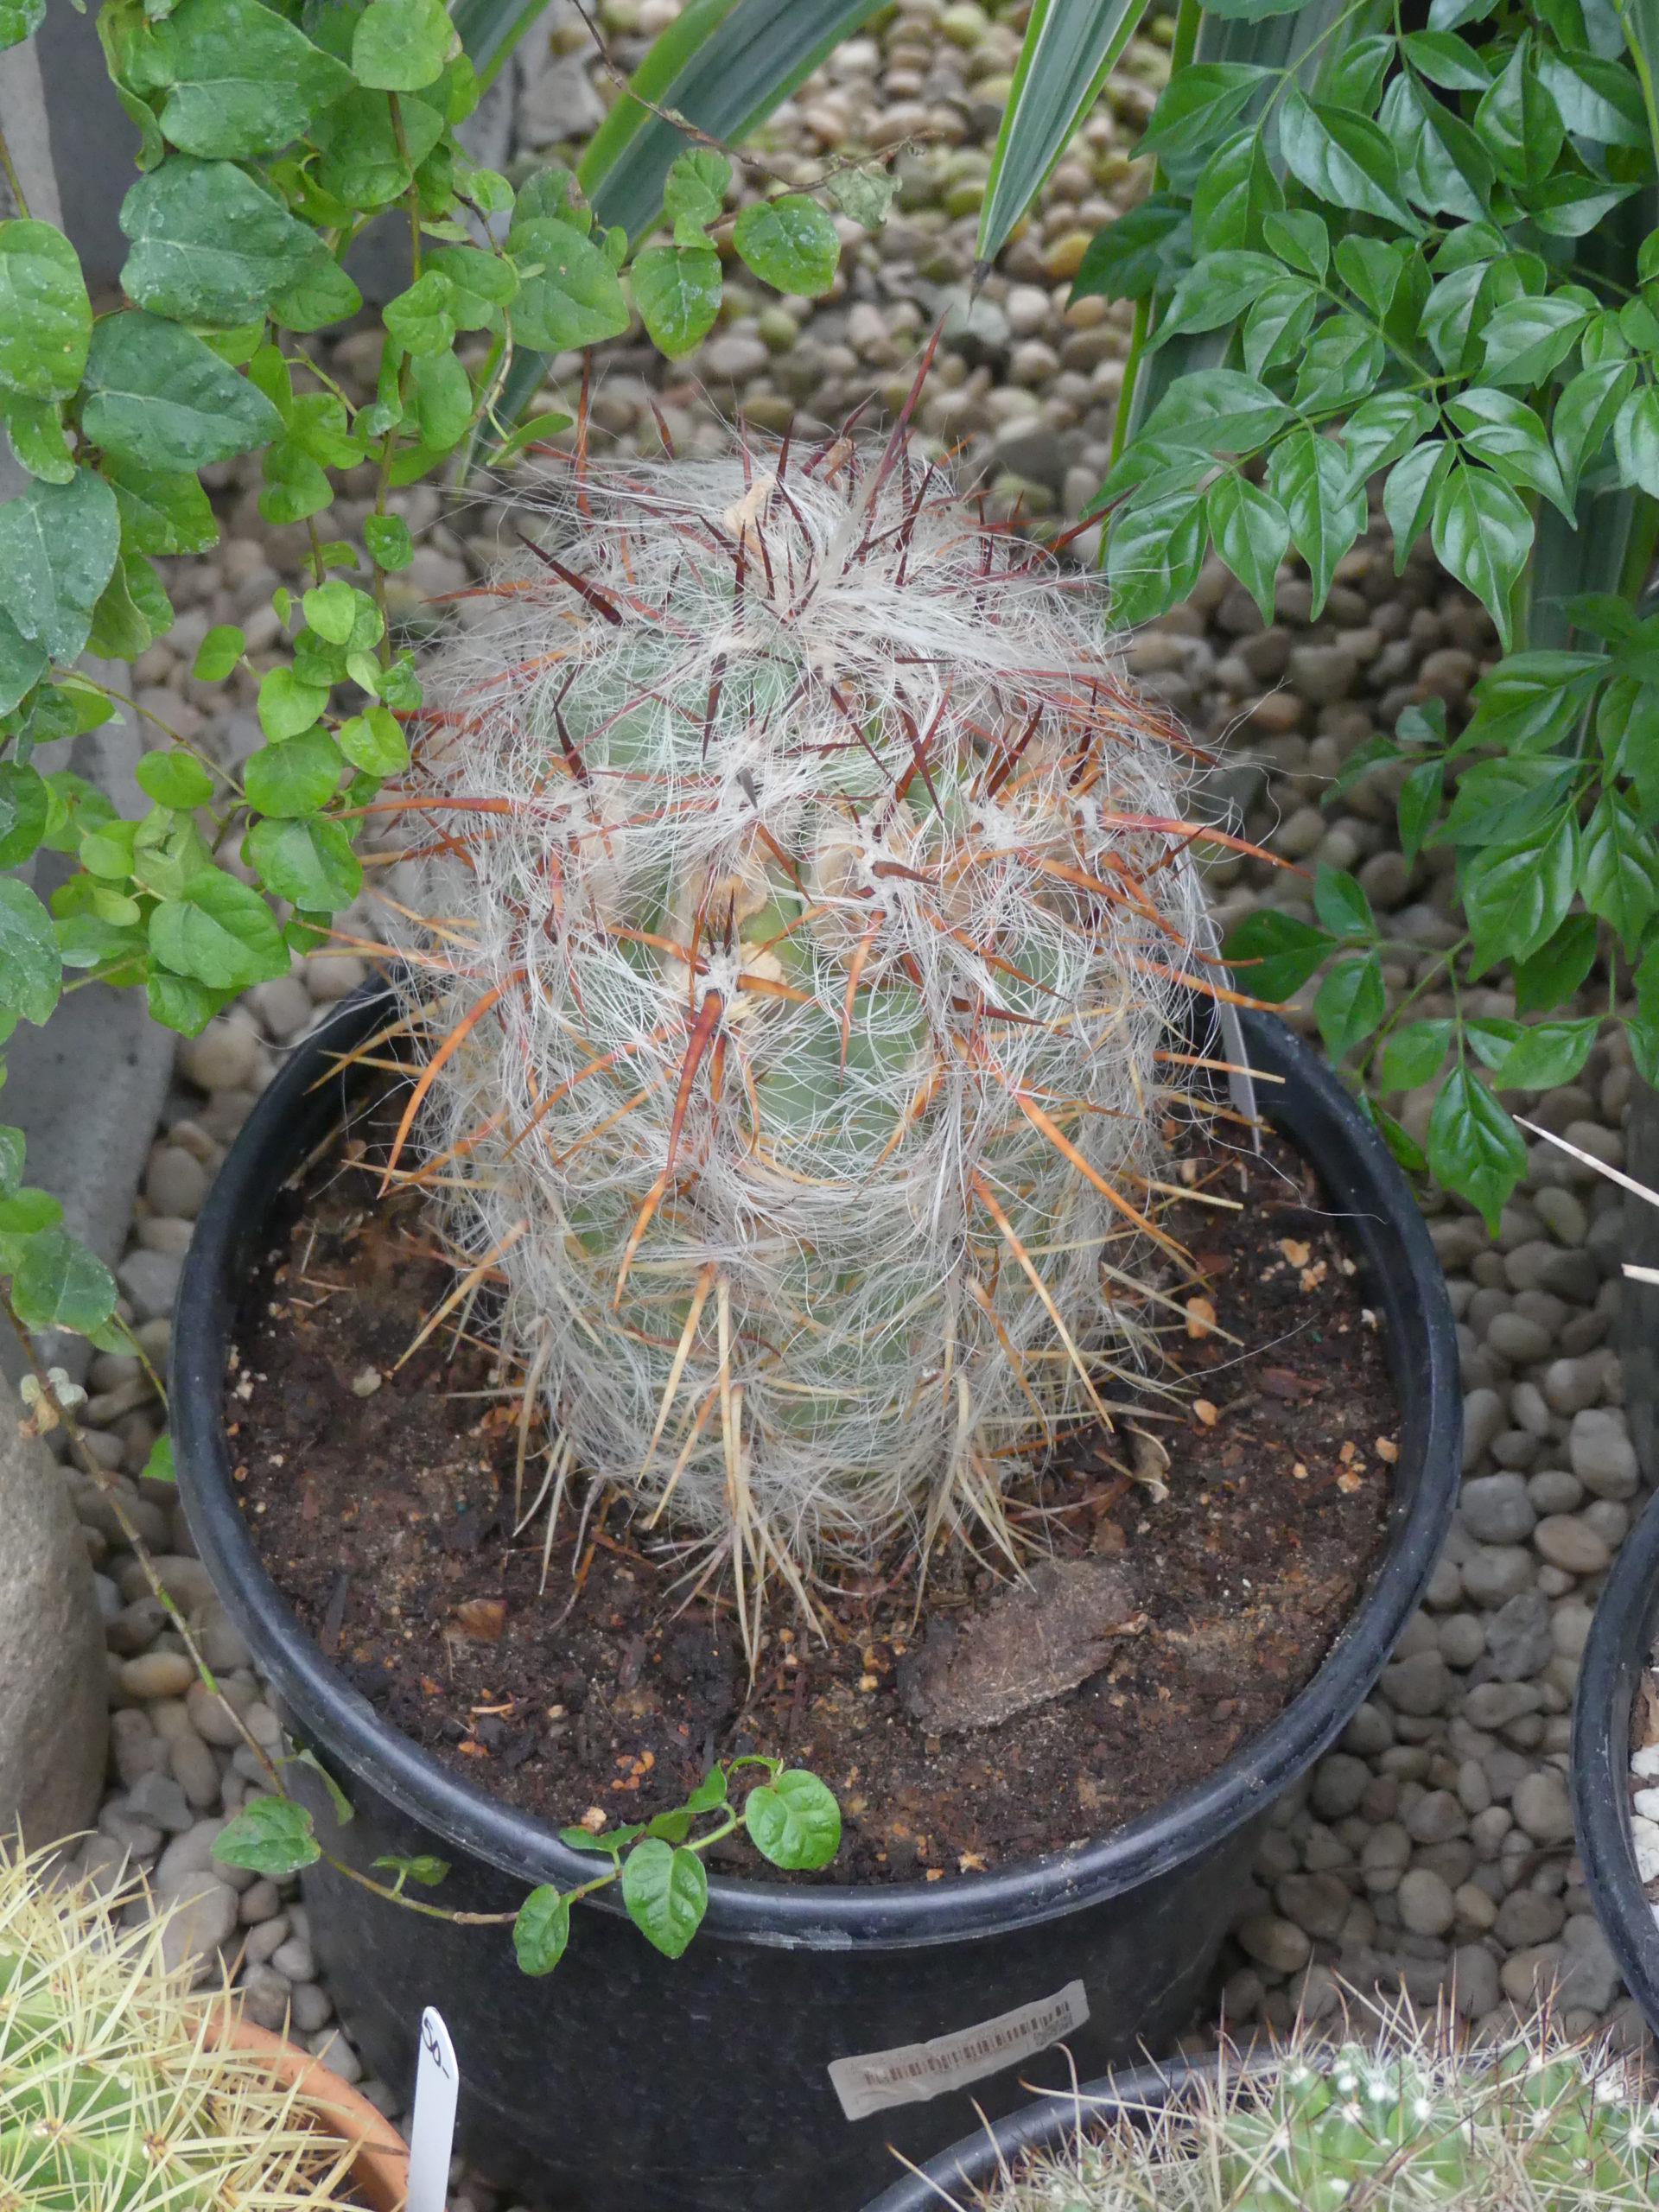 This unlabeled cactus is probably a Mammillaria cactus. This group can be barrel shaped or cylindrical, like this one. They can be “hairy” with spines or just with spines. Flowers can be white, red, yellow or pink. It looks both overpotted and in a plastic pot.